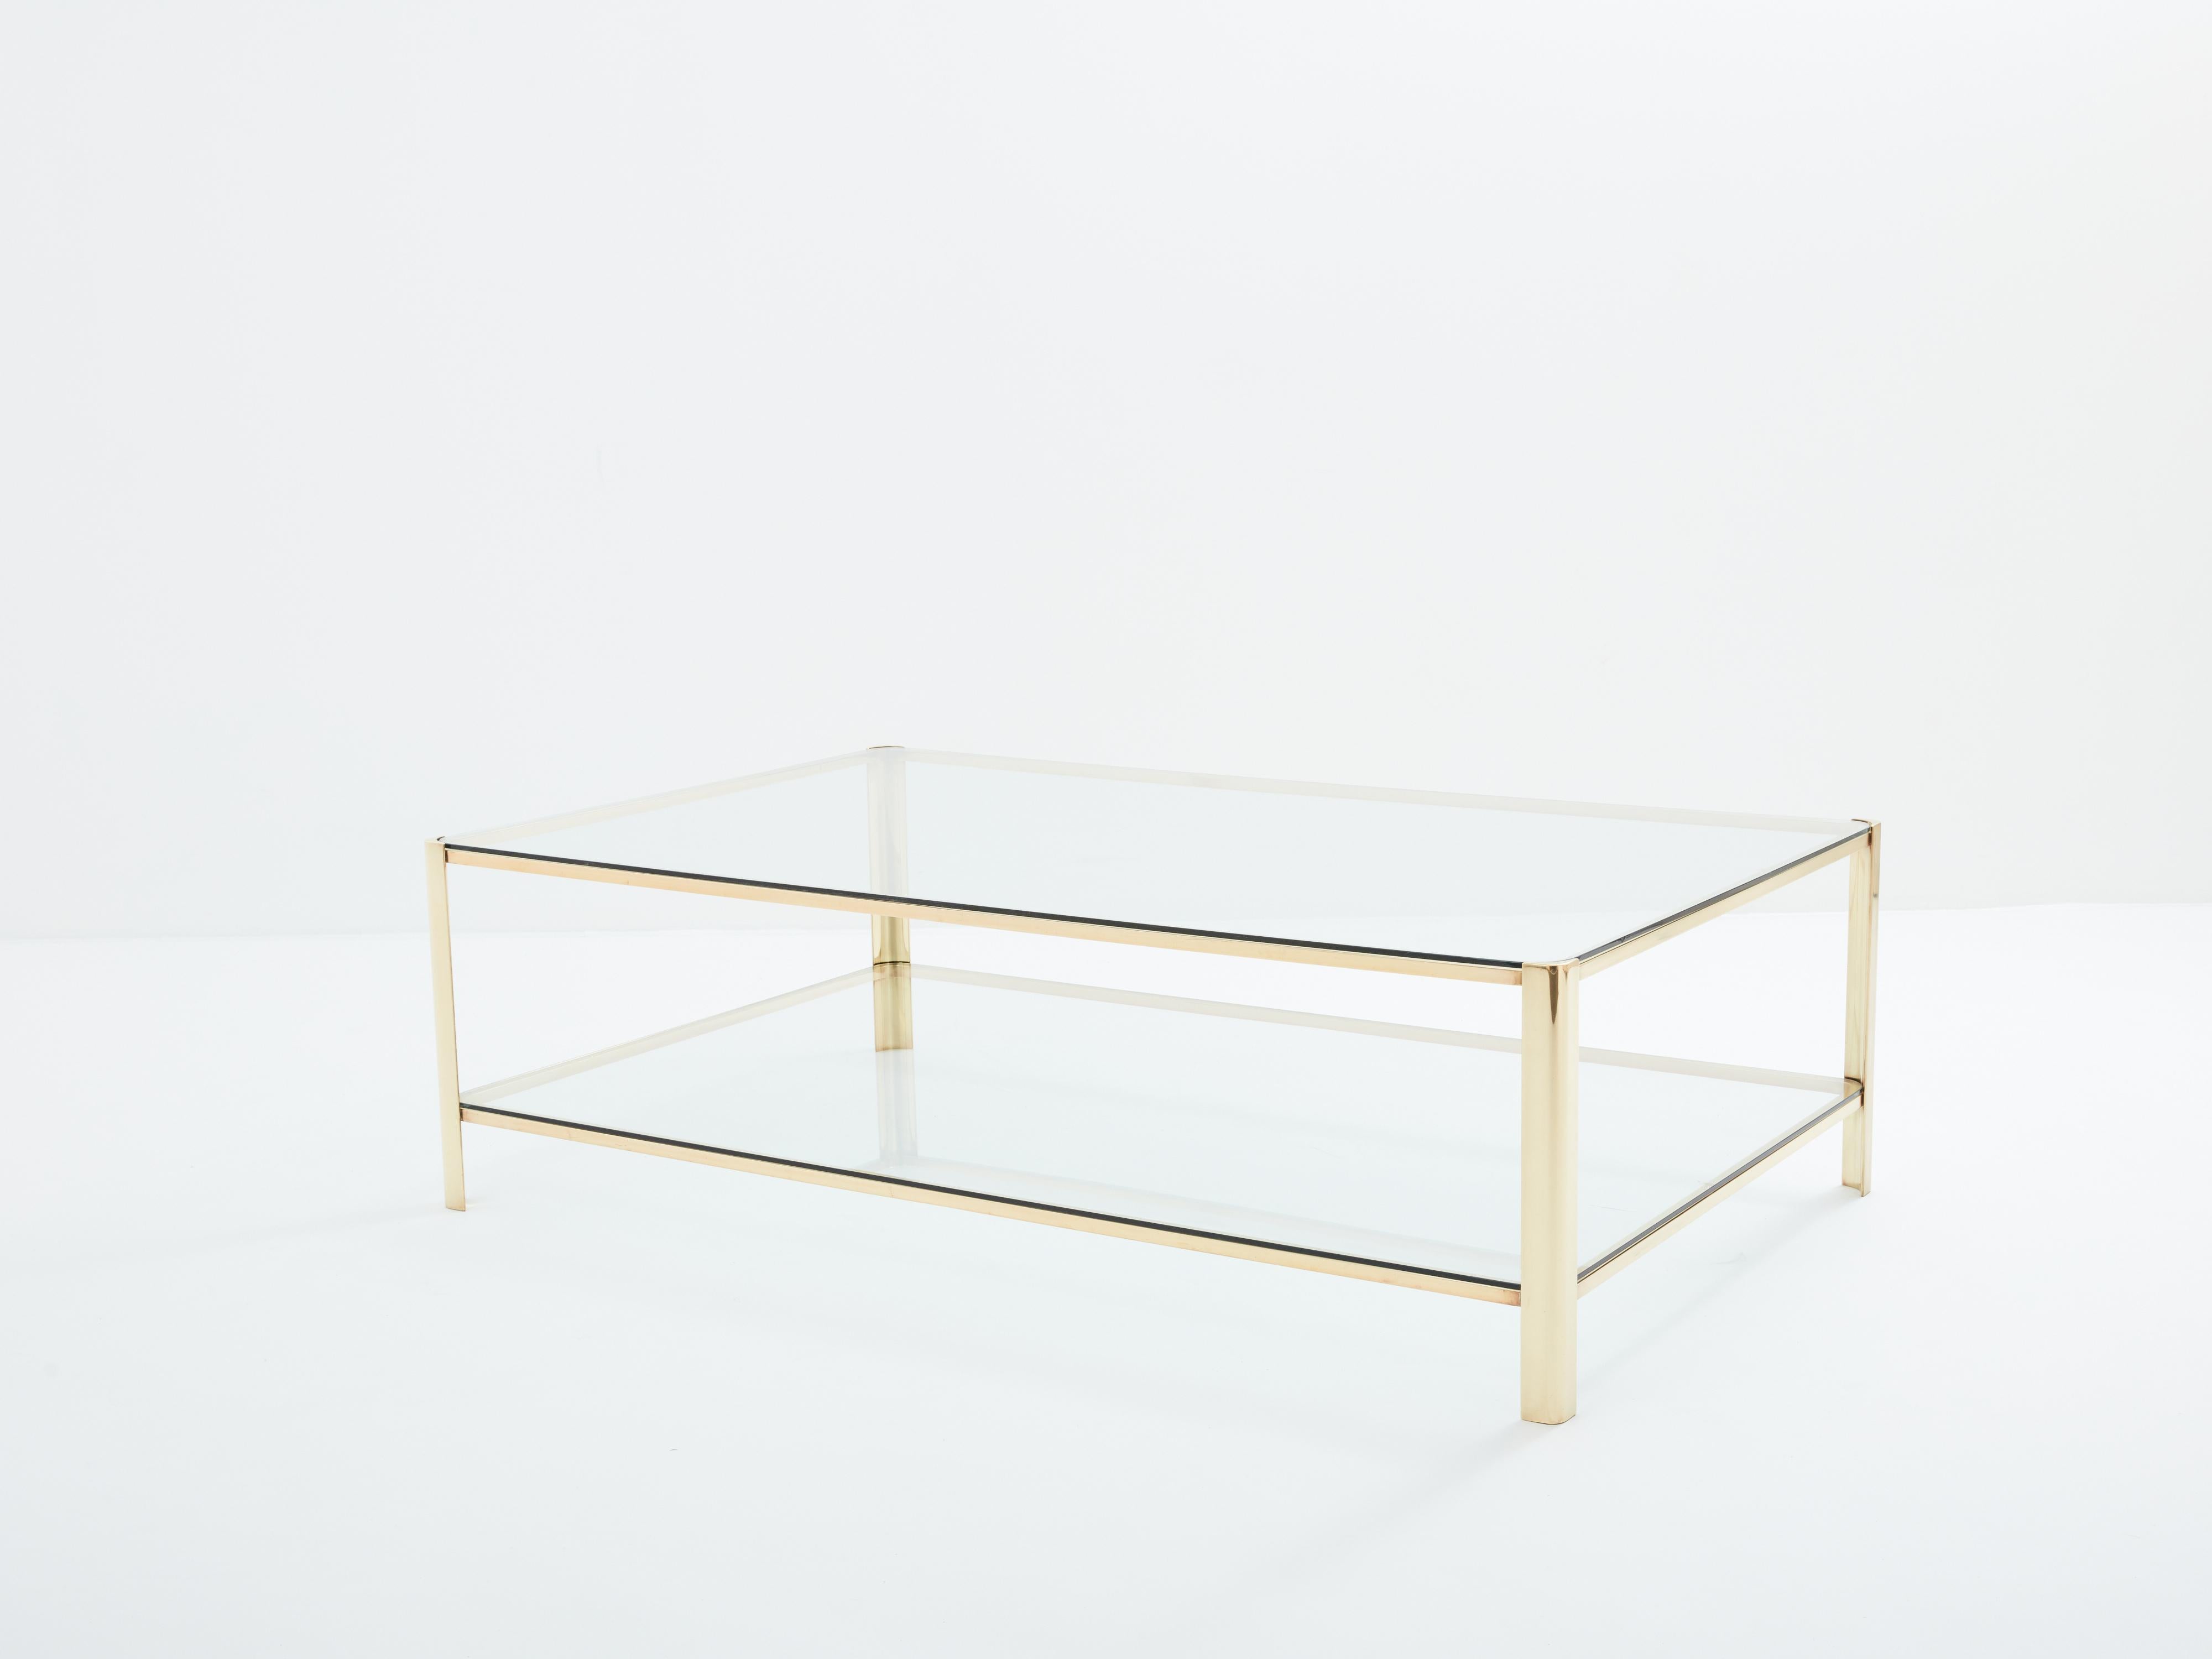 This beautiful coffee table was designed by Jacques Quinet and produced by Broncz in France in the 1960s. The table features a strong, solid polished bronze structure. The original two-tier transparent glass tops add a nice aesthetic appeal as well